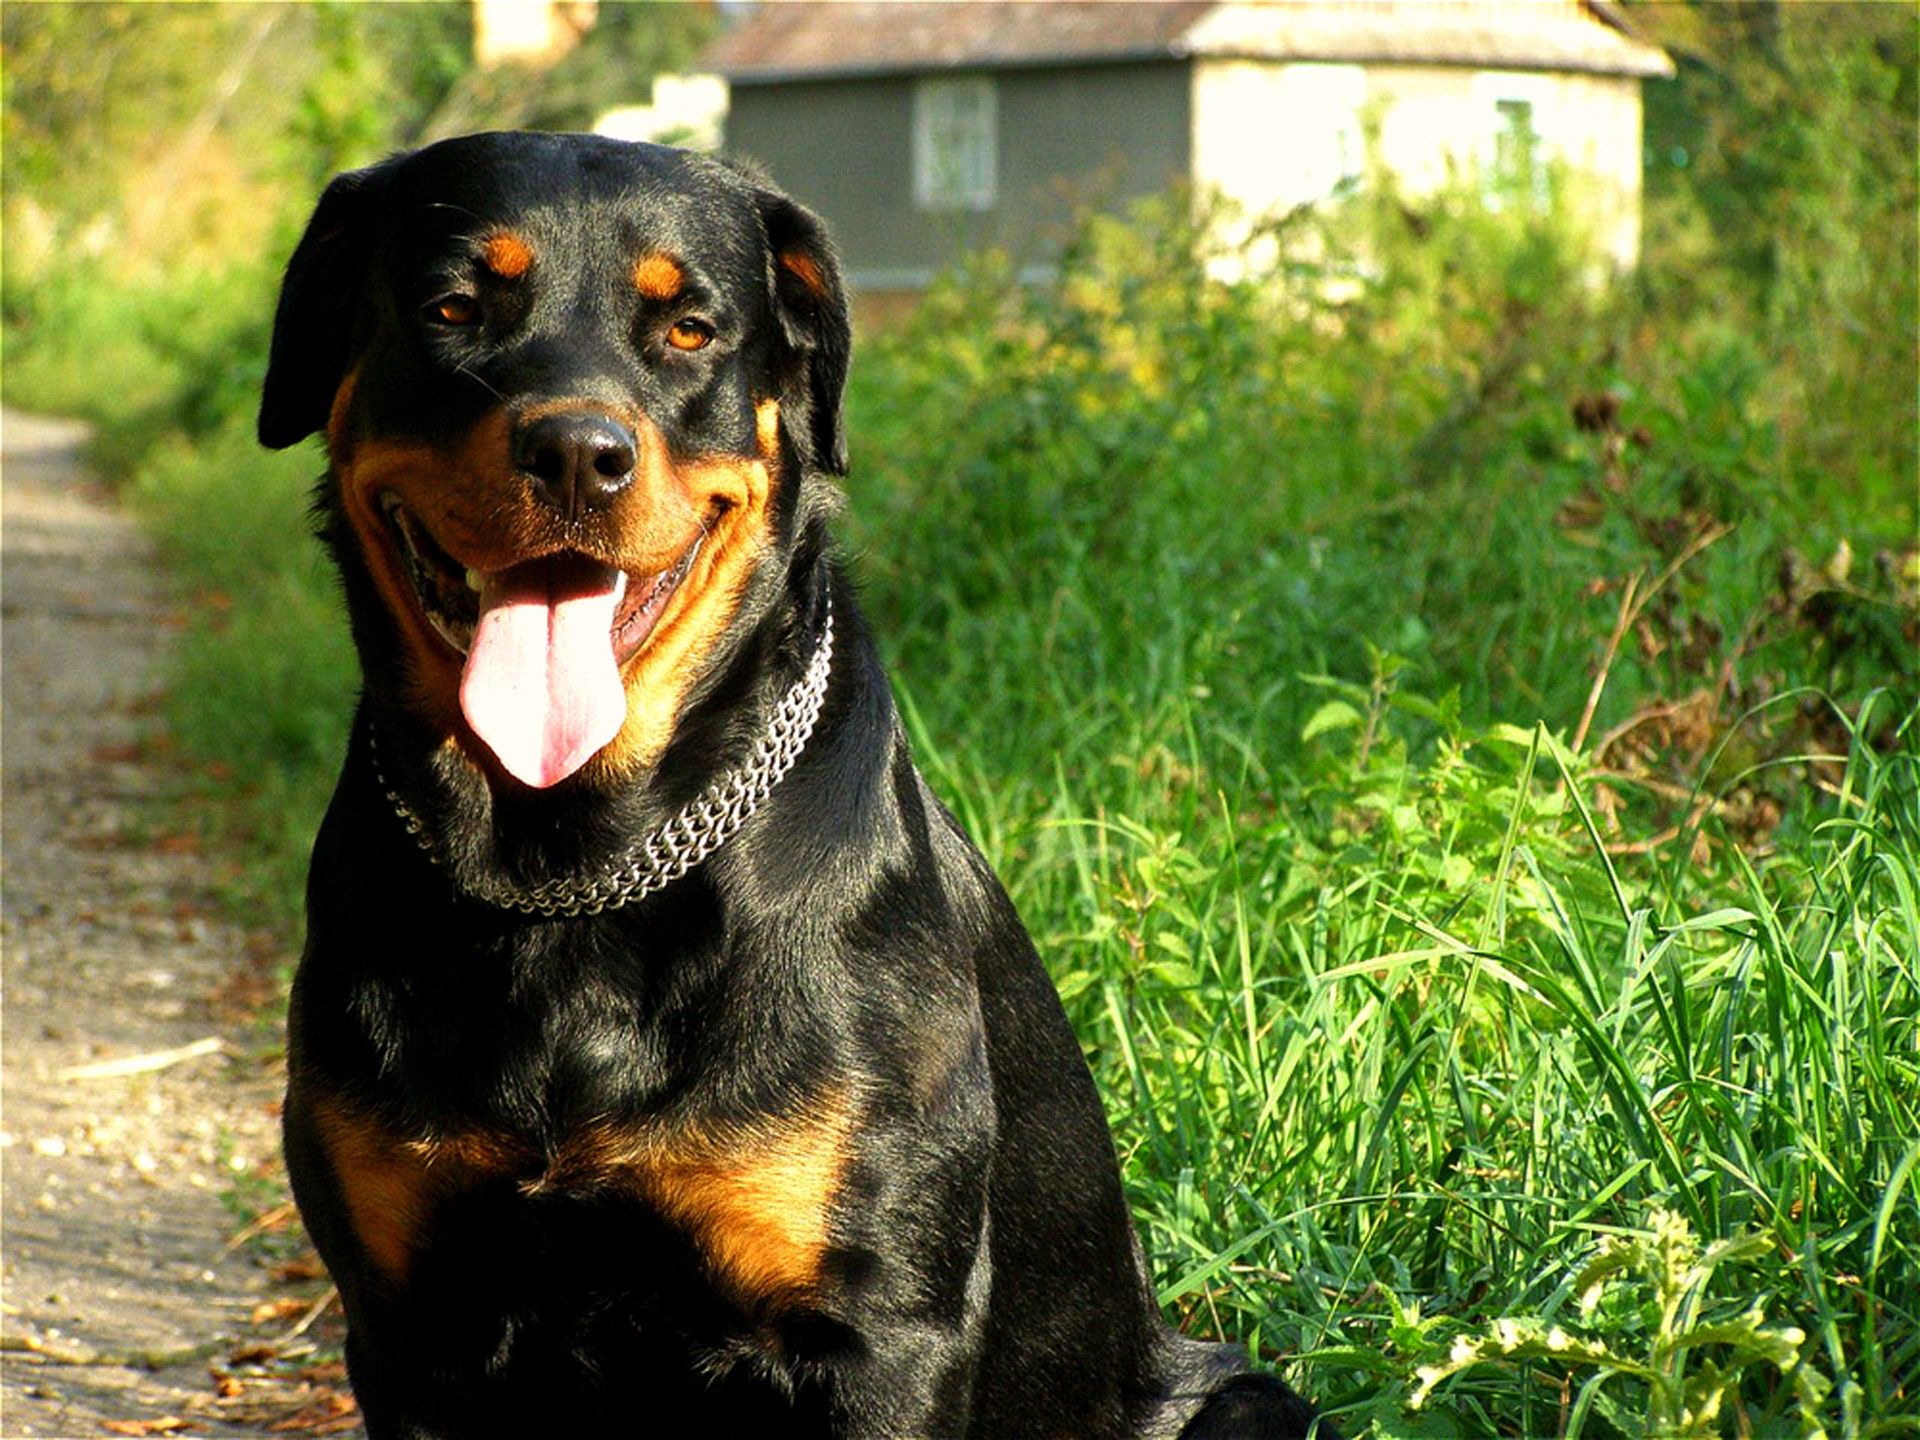 dogs dog pet mammal cute animal portrait canine domestic looking grass puppy rottweiler sit young